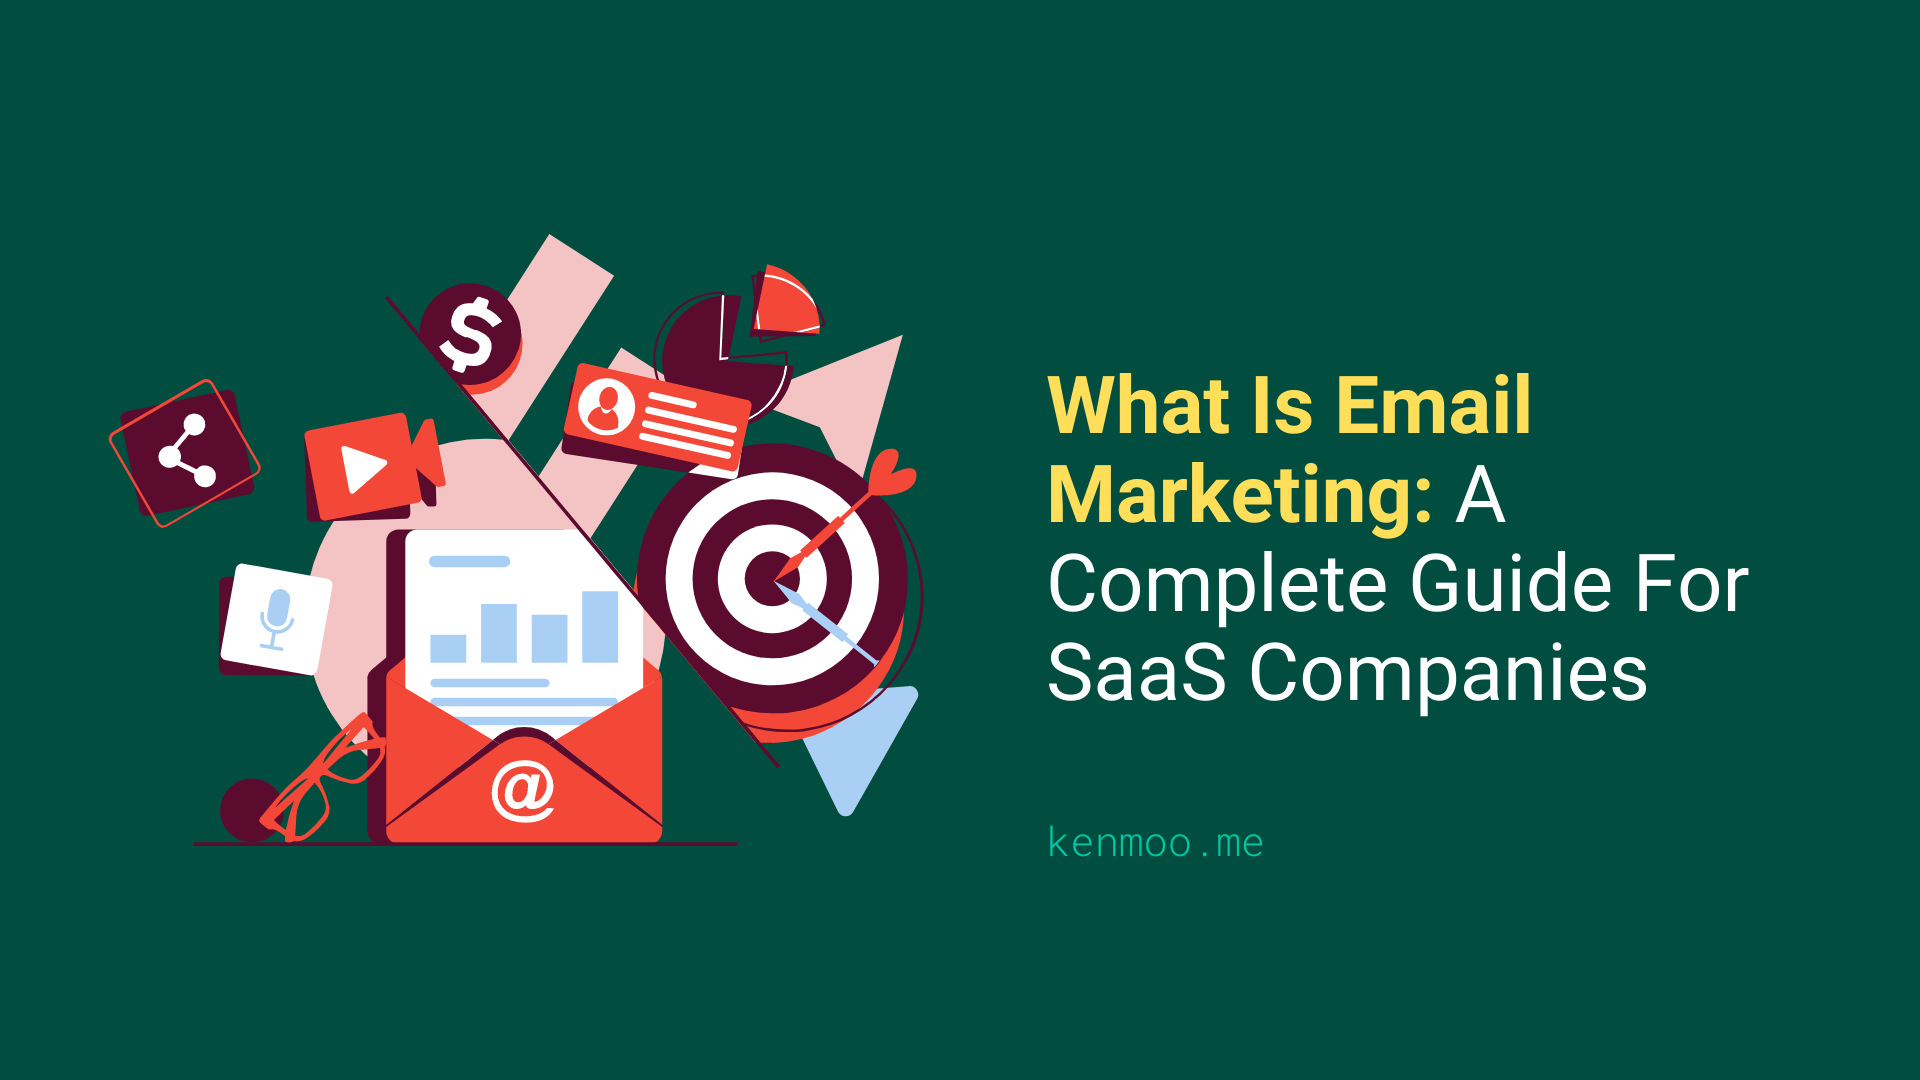 What Is Email Marketing: A Complete Guide For SaaS Companies